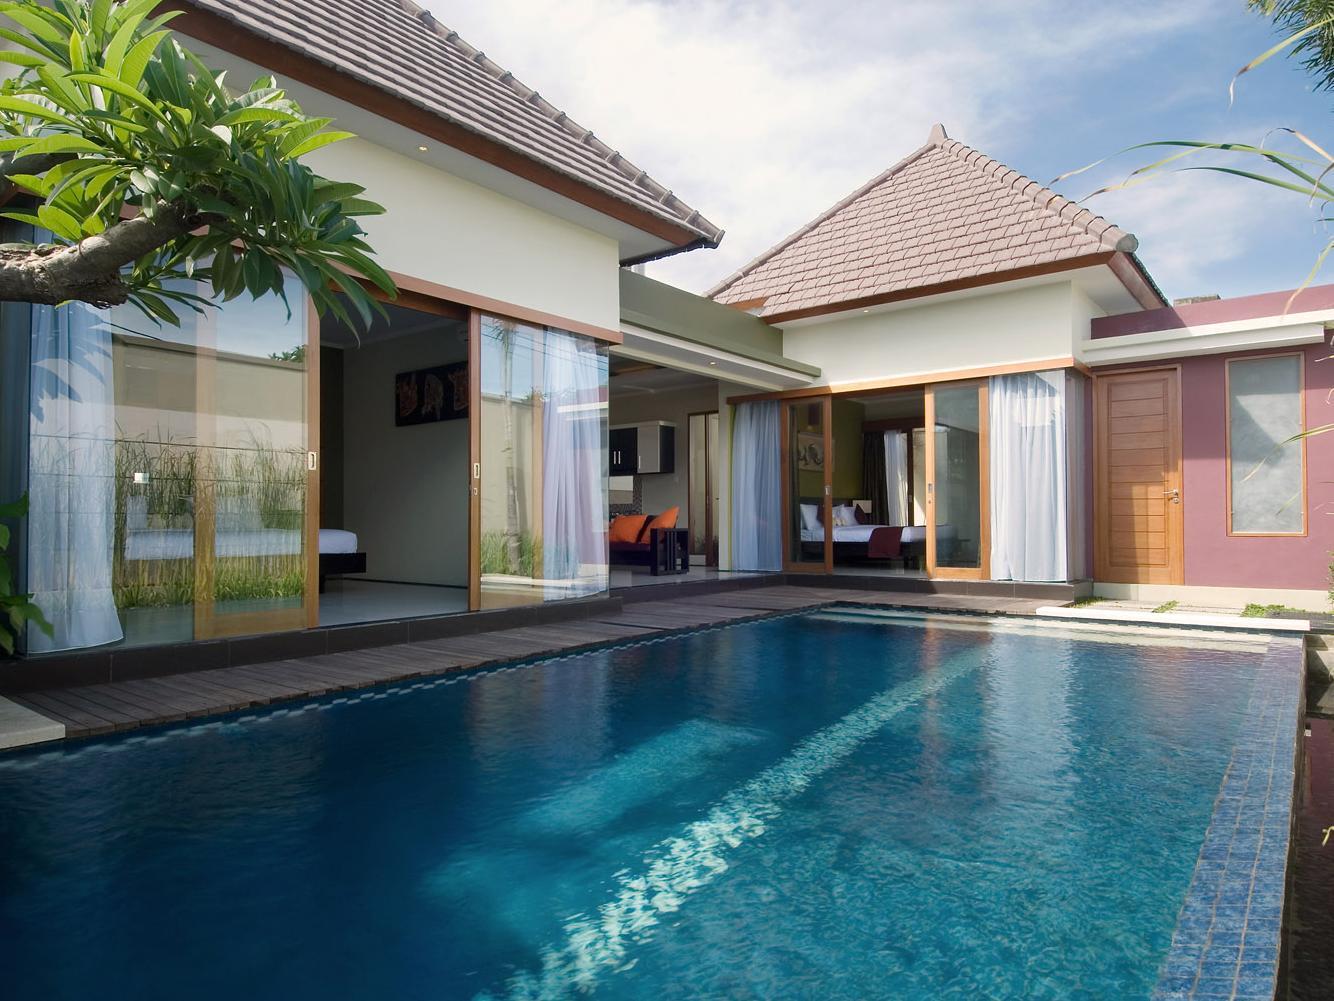 Bali Swiss Villa Hotel Bali District FAQ 2016, What facilities are there in Bali Swiss Villa Hotel Bali District 2016, What Languages Spoken are Supported in Bali Swiss Villa Hotel Bali District 2016, Which payment cards are accepted in Bali Swiss Villa Hotel Bali District , Bali District Bali Swiss Villa Hotel room facilities and services Q&A 2016, Bali District Bali Swiss Villa Hotel online booking services 2016, Bali District Bali Swiss Villa Hotel address 2016, Bali District Bali Swiss Villa Hotel telephone number 2016,Bali District Bali Swiss Villa Hotel map 2016, Bali District Bali Swiss Villa Hotel traffic guide 2016, how to go Bali District Bali Swiss Villa Hotel, Bali District Bali Swiss Villa Hotel booking online 2016, Bali District Bali Swiss Villa Hotel room types 2016.